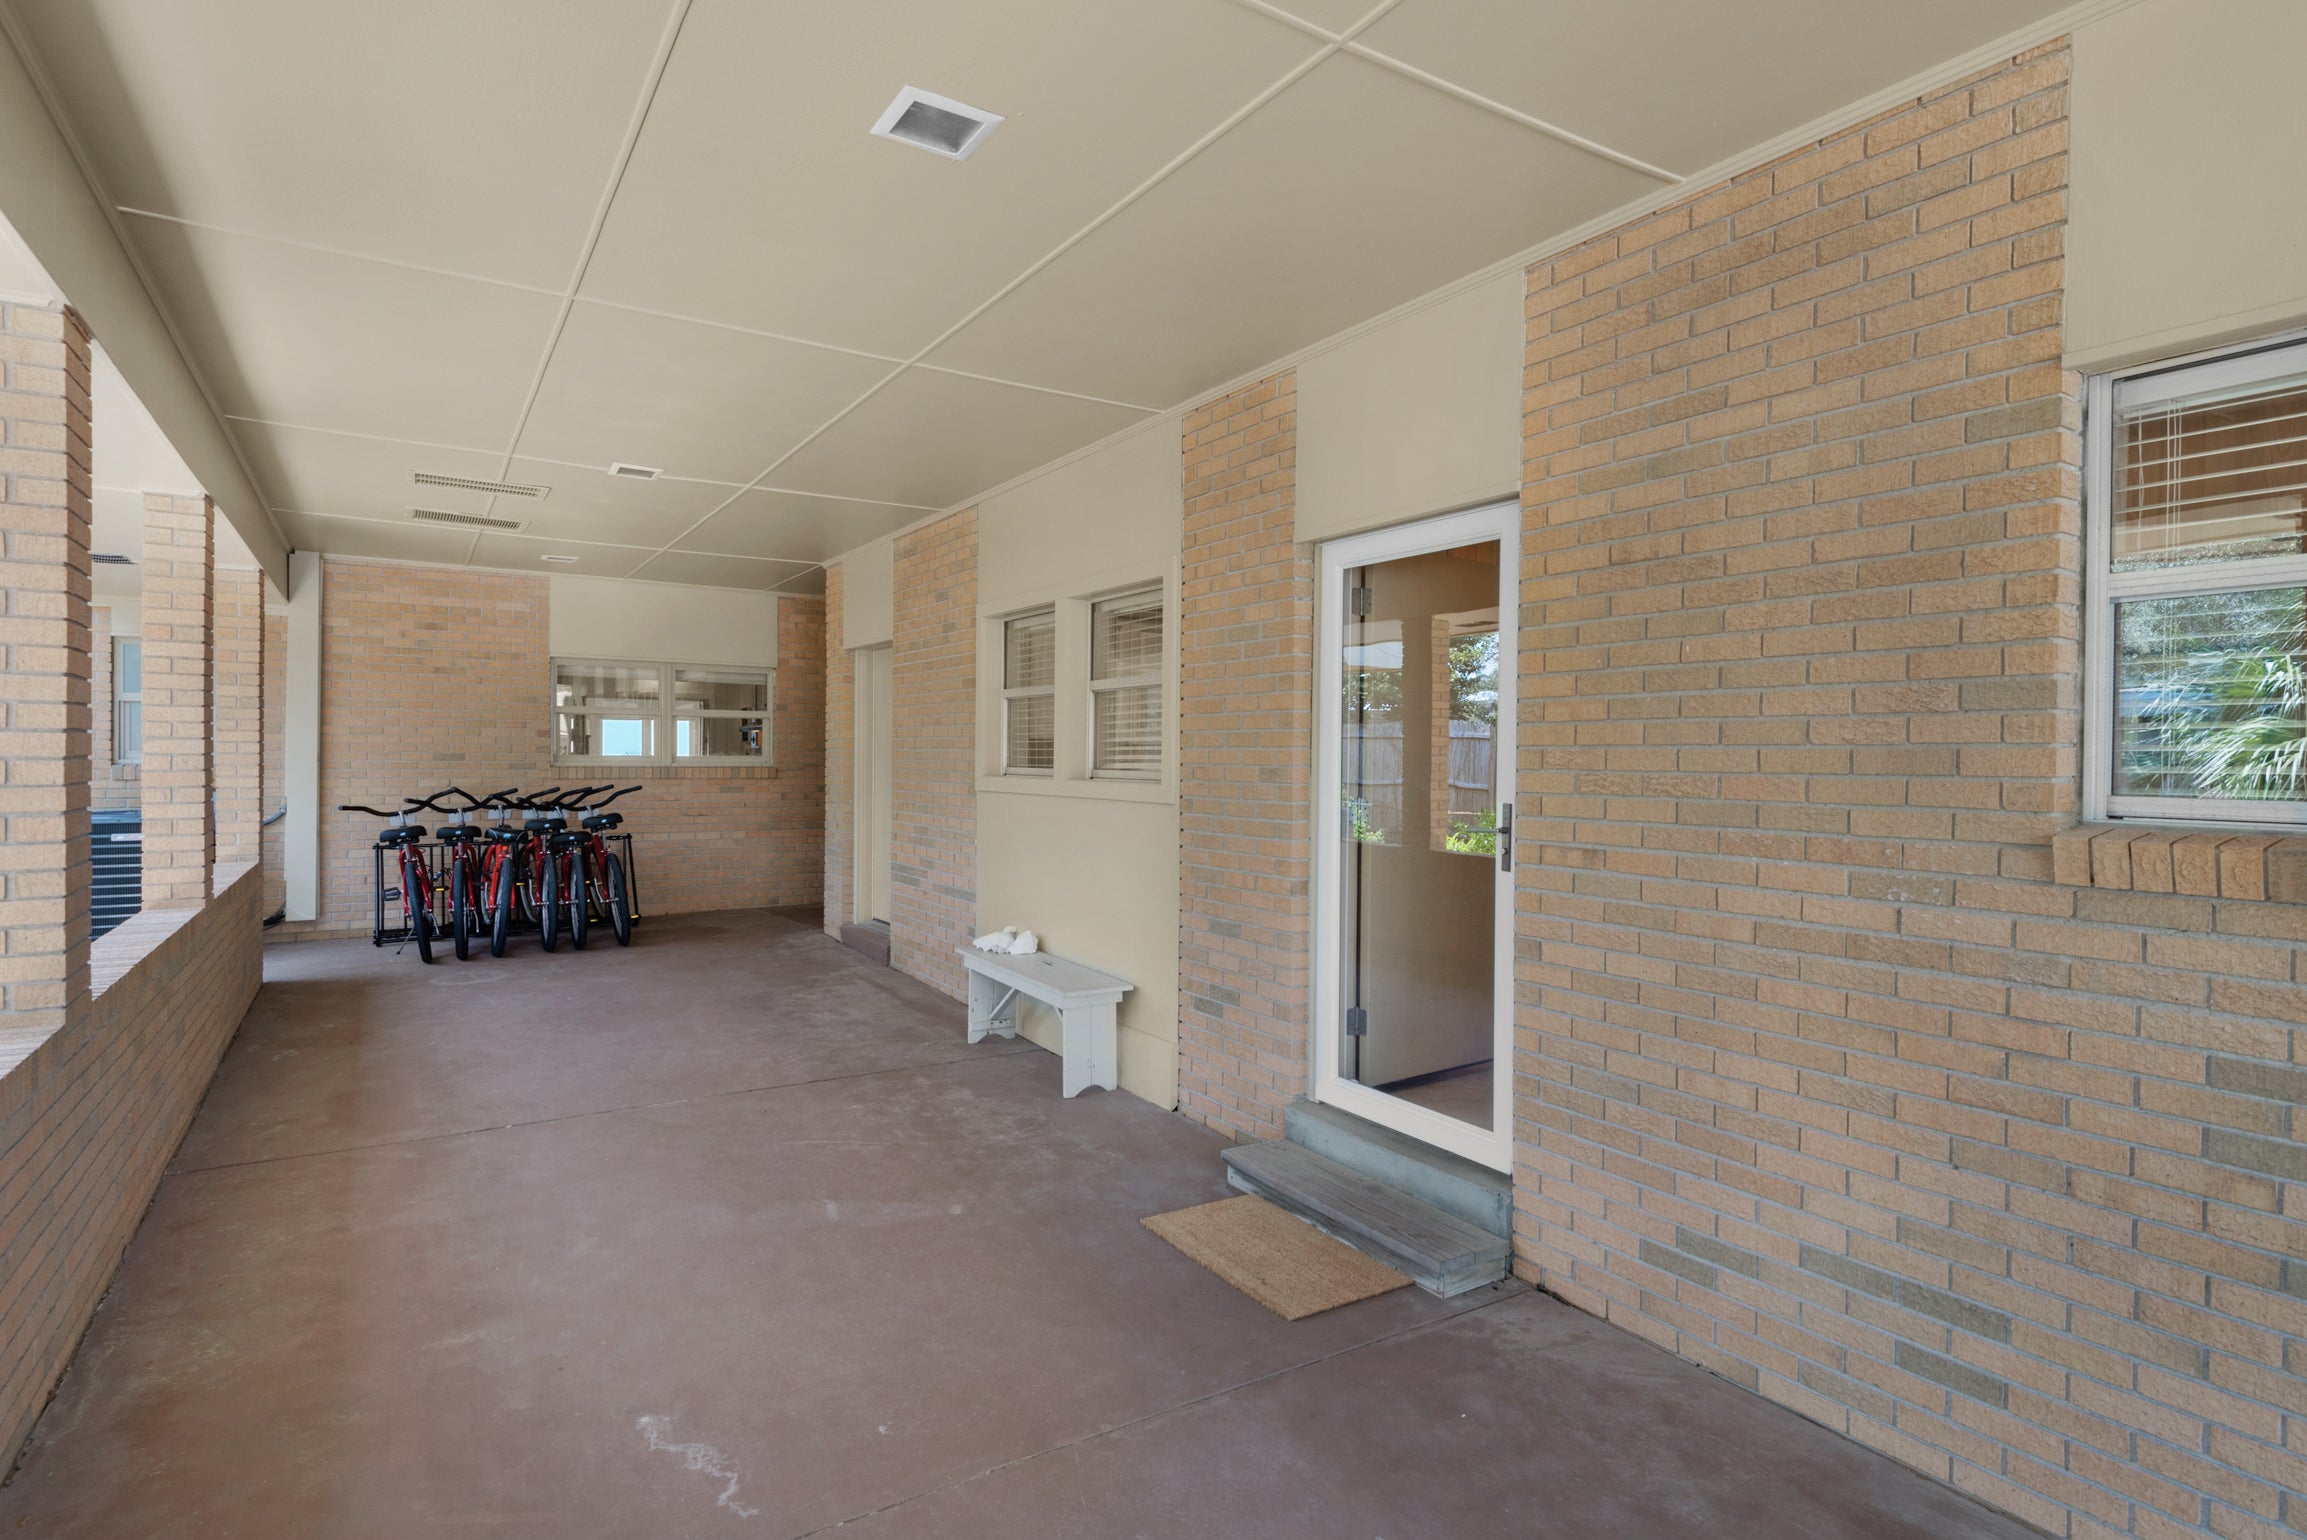 Convenient+Breezeway+connects+the+Two+Homes